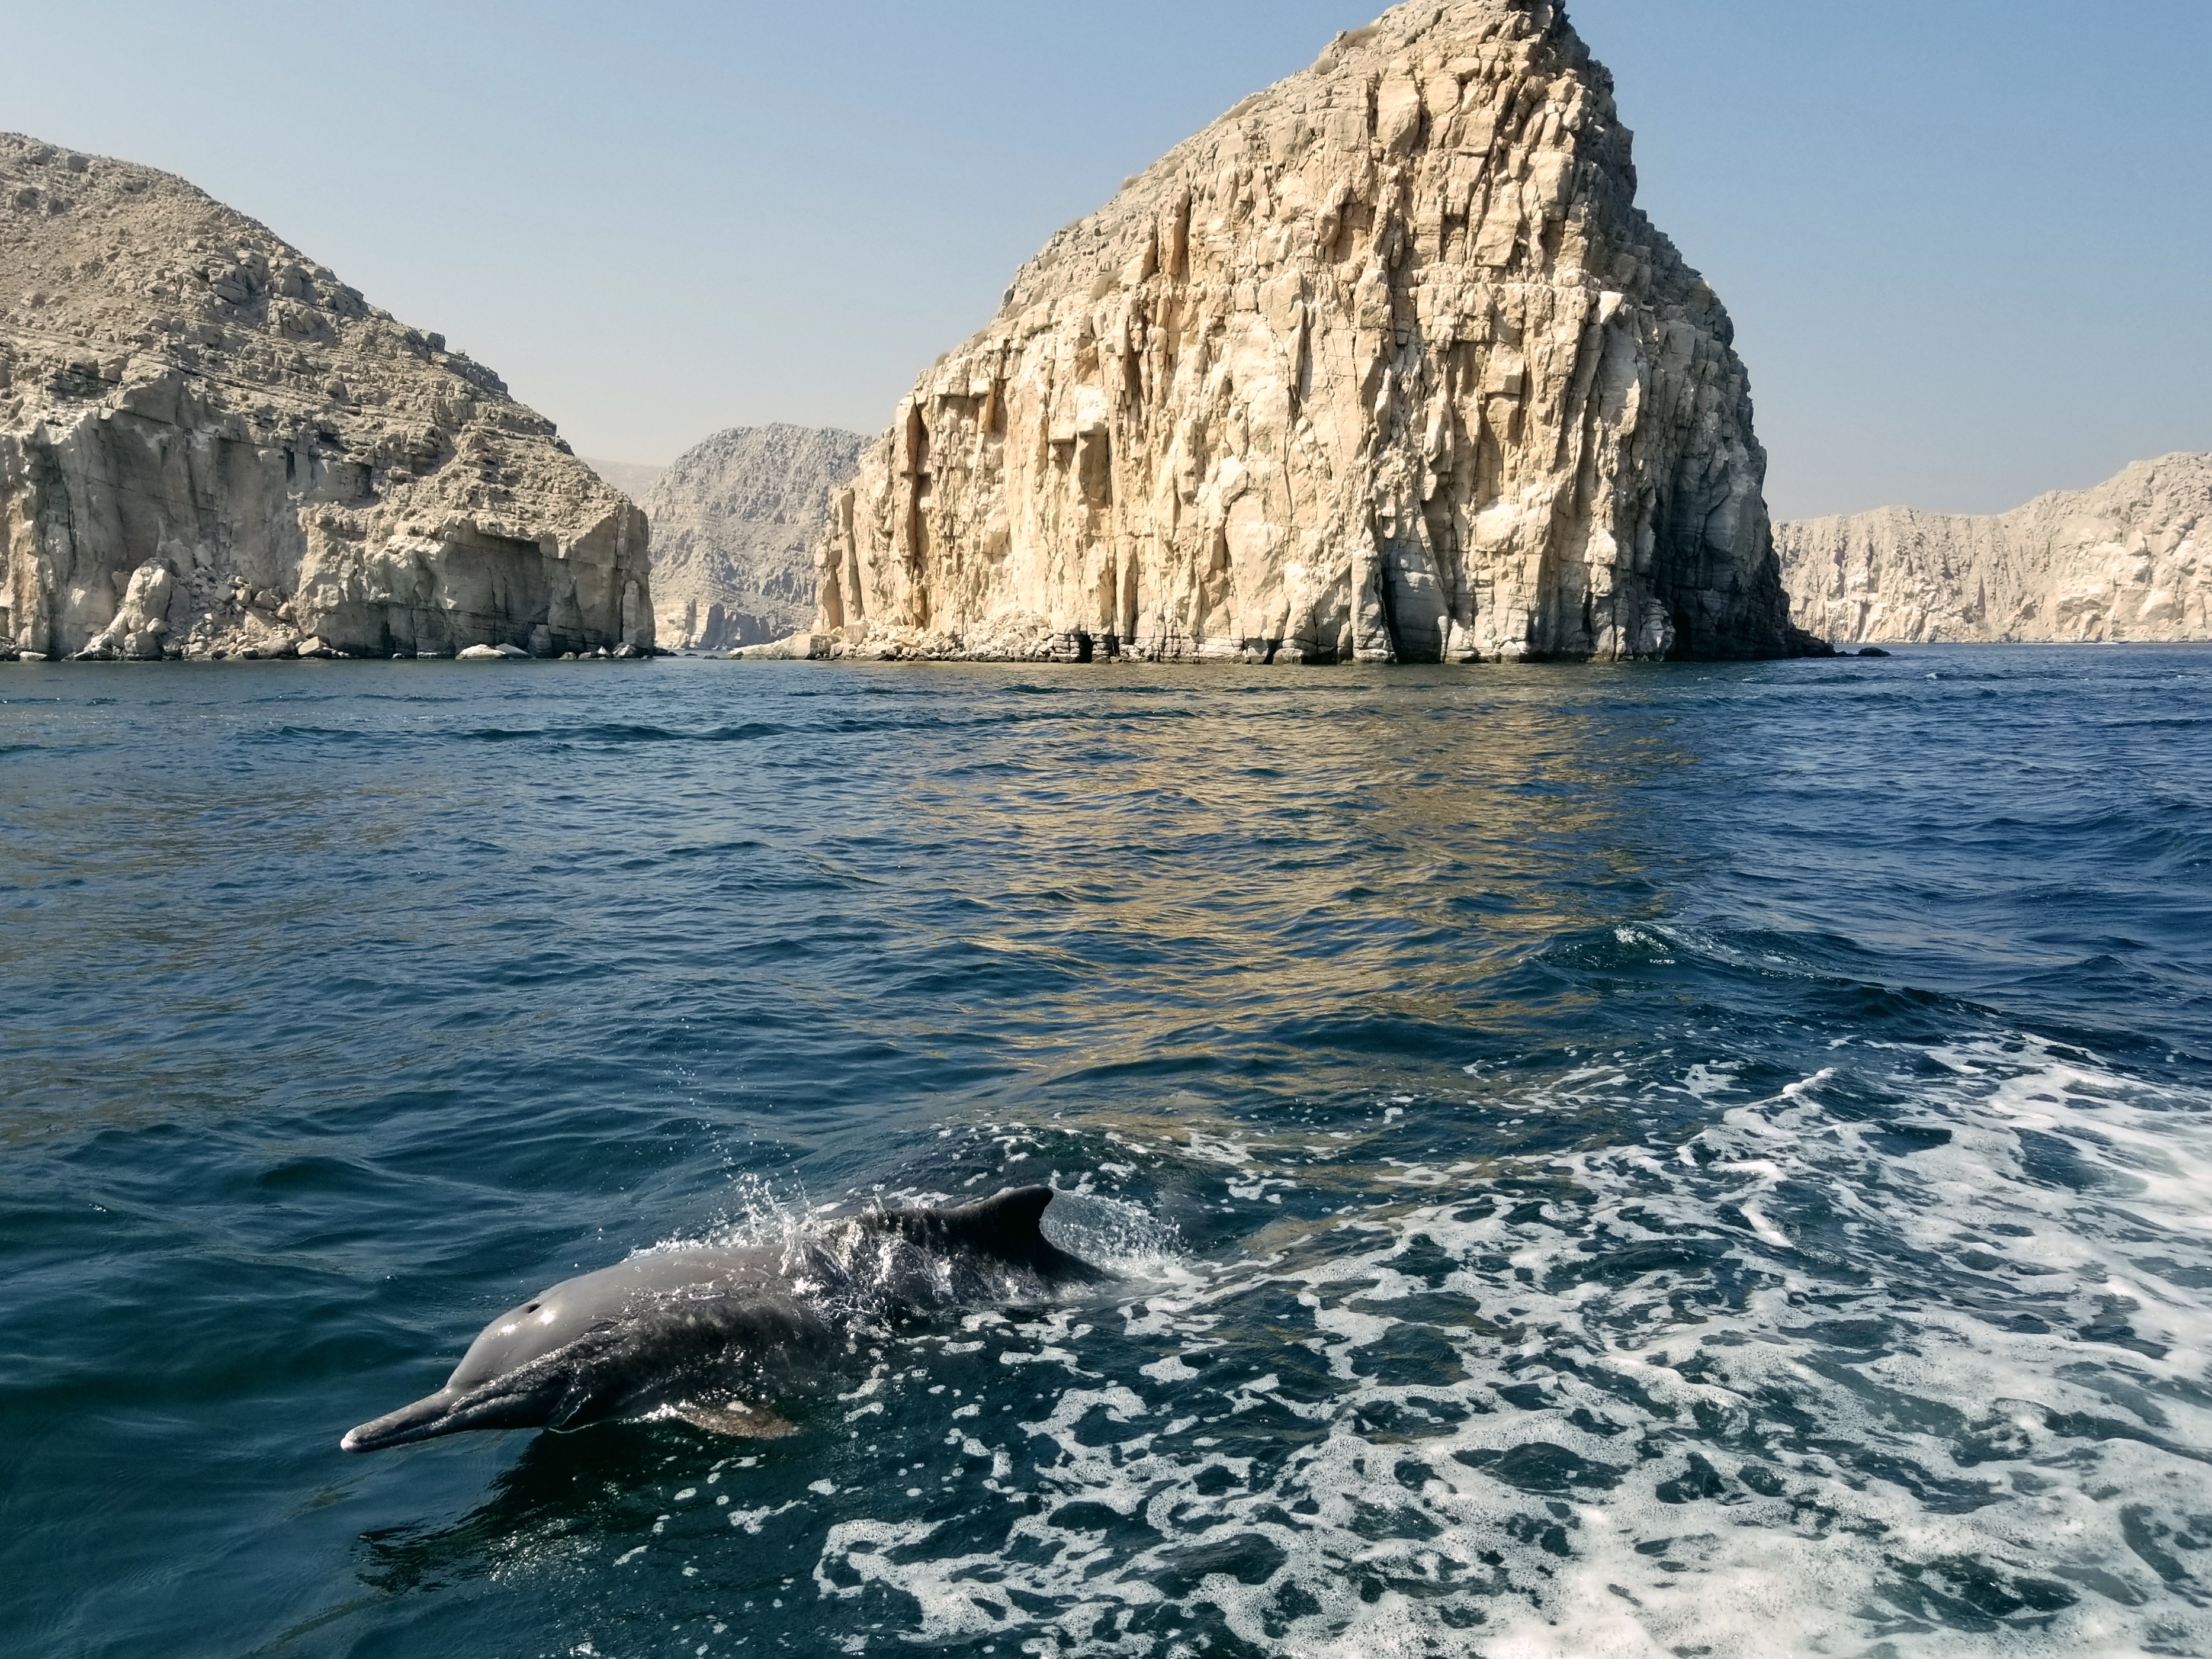 Dolphin swimming in Oman's idyllic Musandam Peninsula during a day trip from Dubai. CC: Jasmine Nears-Biesinger This work by Jasmine Nears is licensed under a Creative Commons Attribution-ShareAlike 4.0 International License